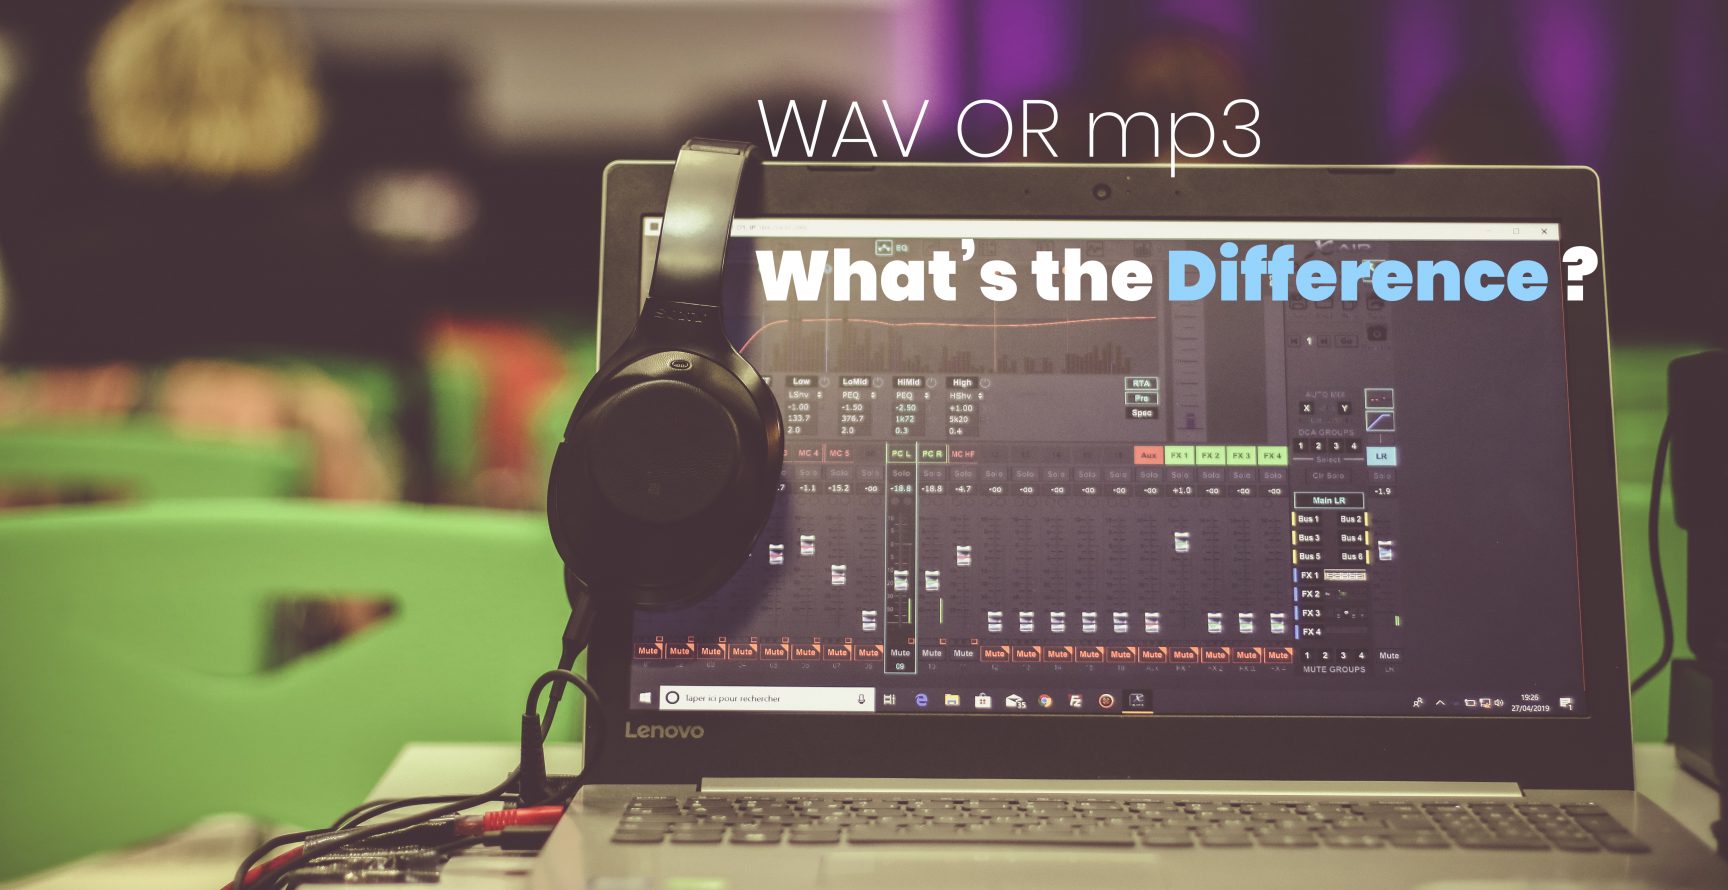 wav or mp3 - whats the difference - DAW Software running on laptop